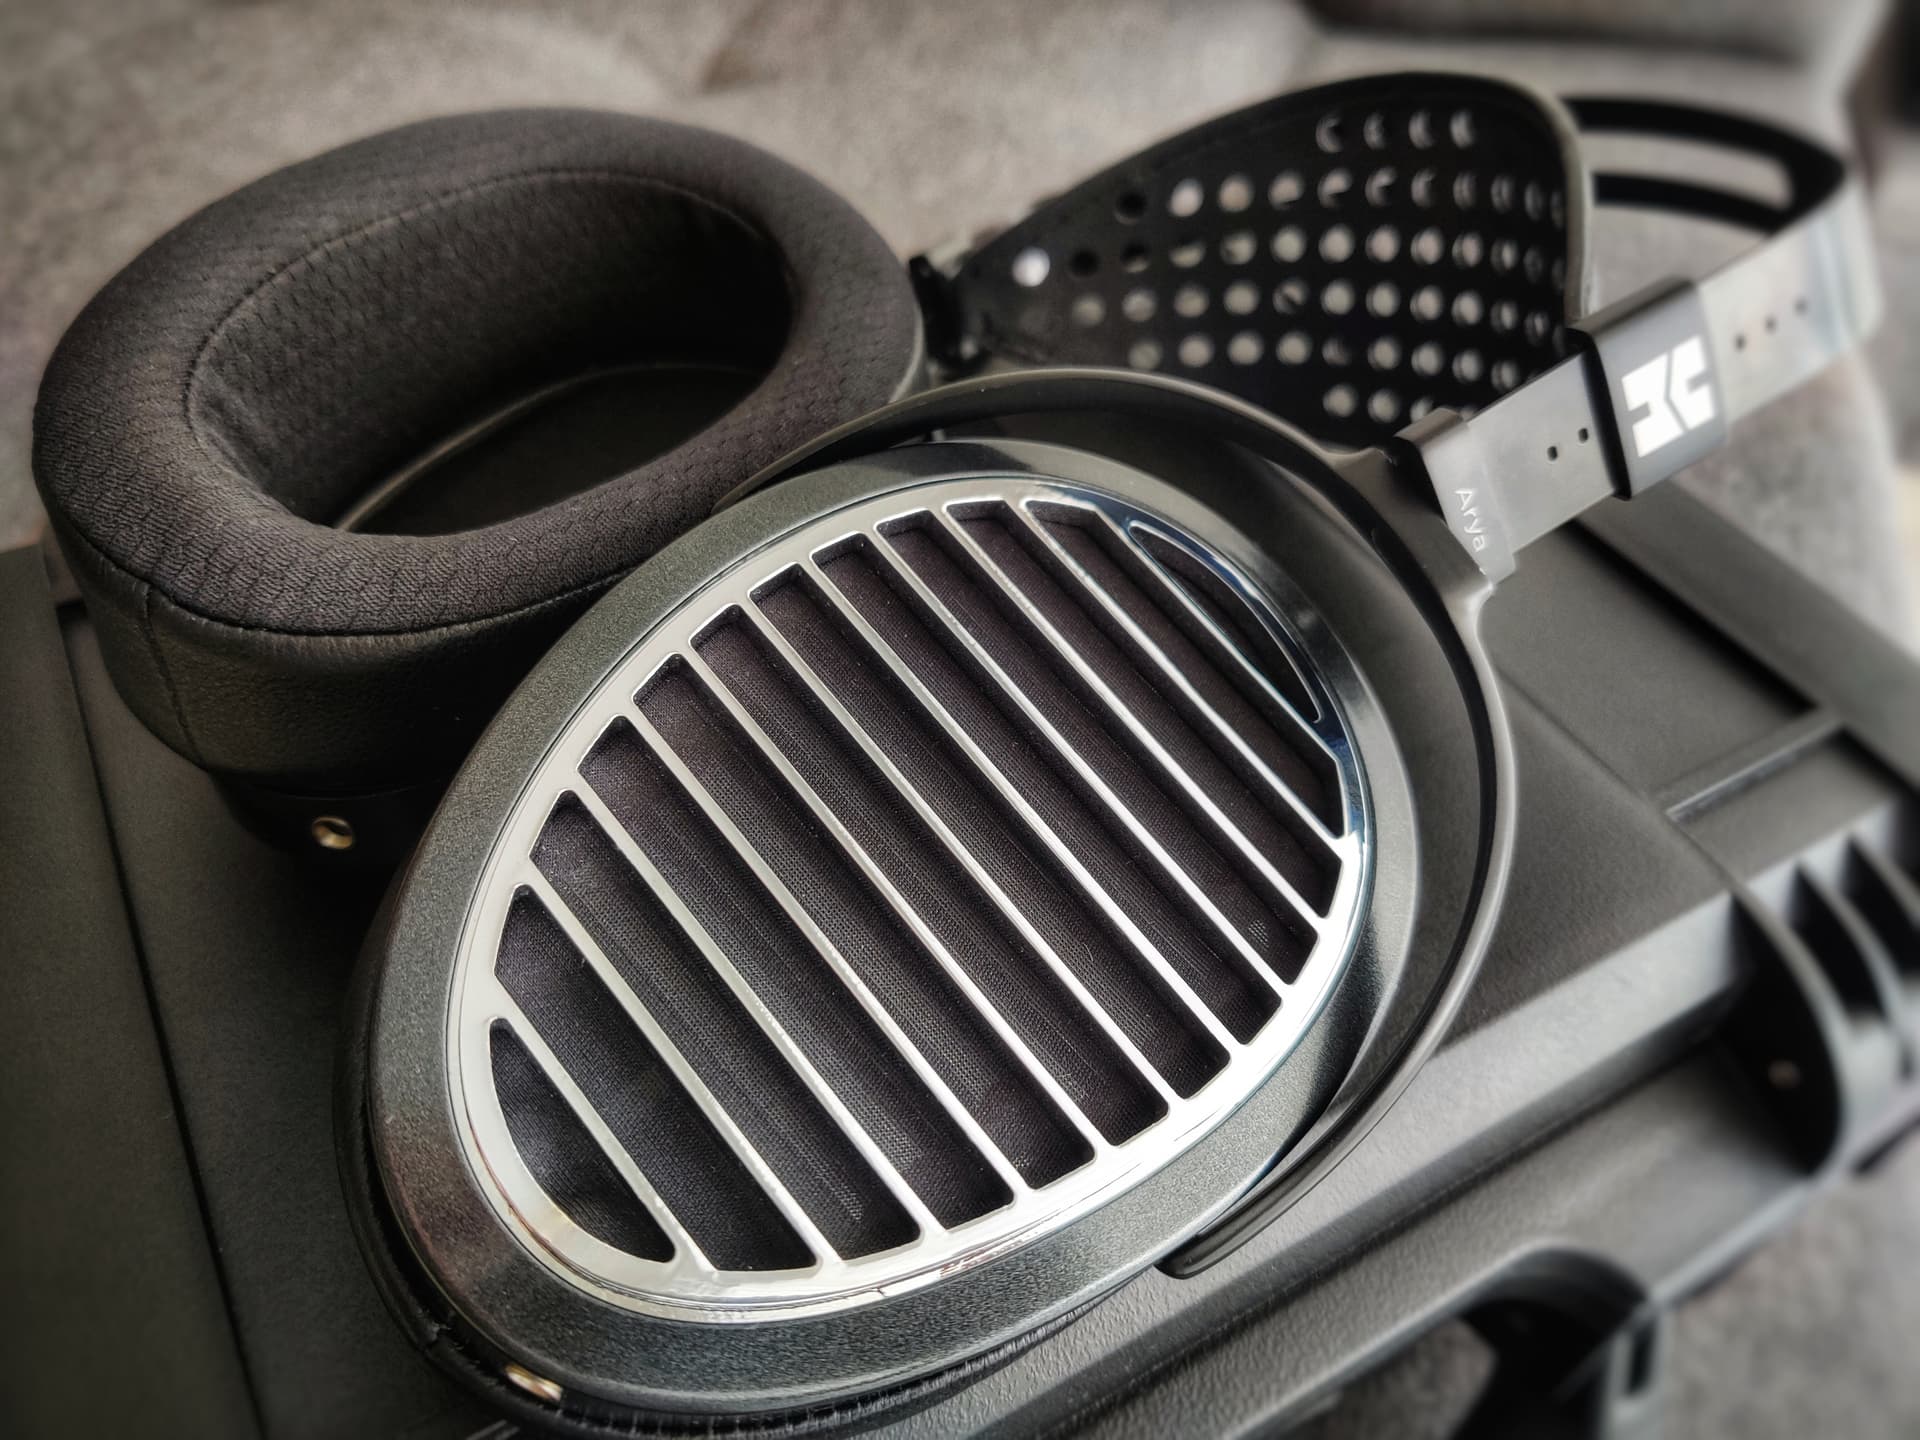 HIFIMAN Edition XS Review: Now This Changes Things! (Incl. Ananda